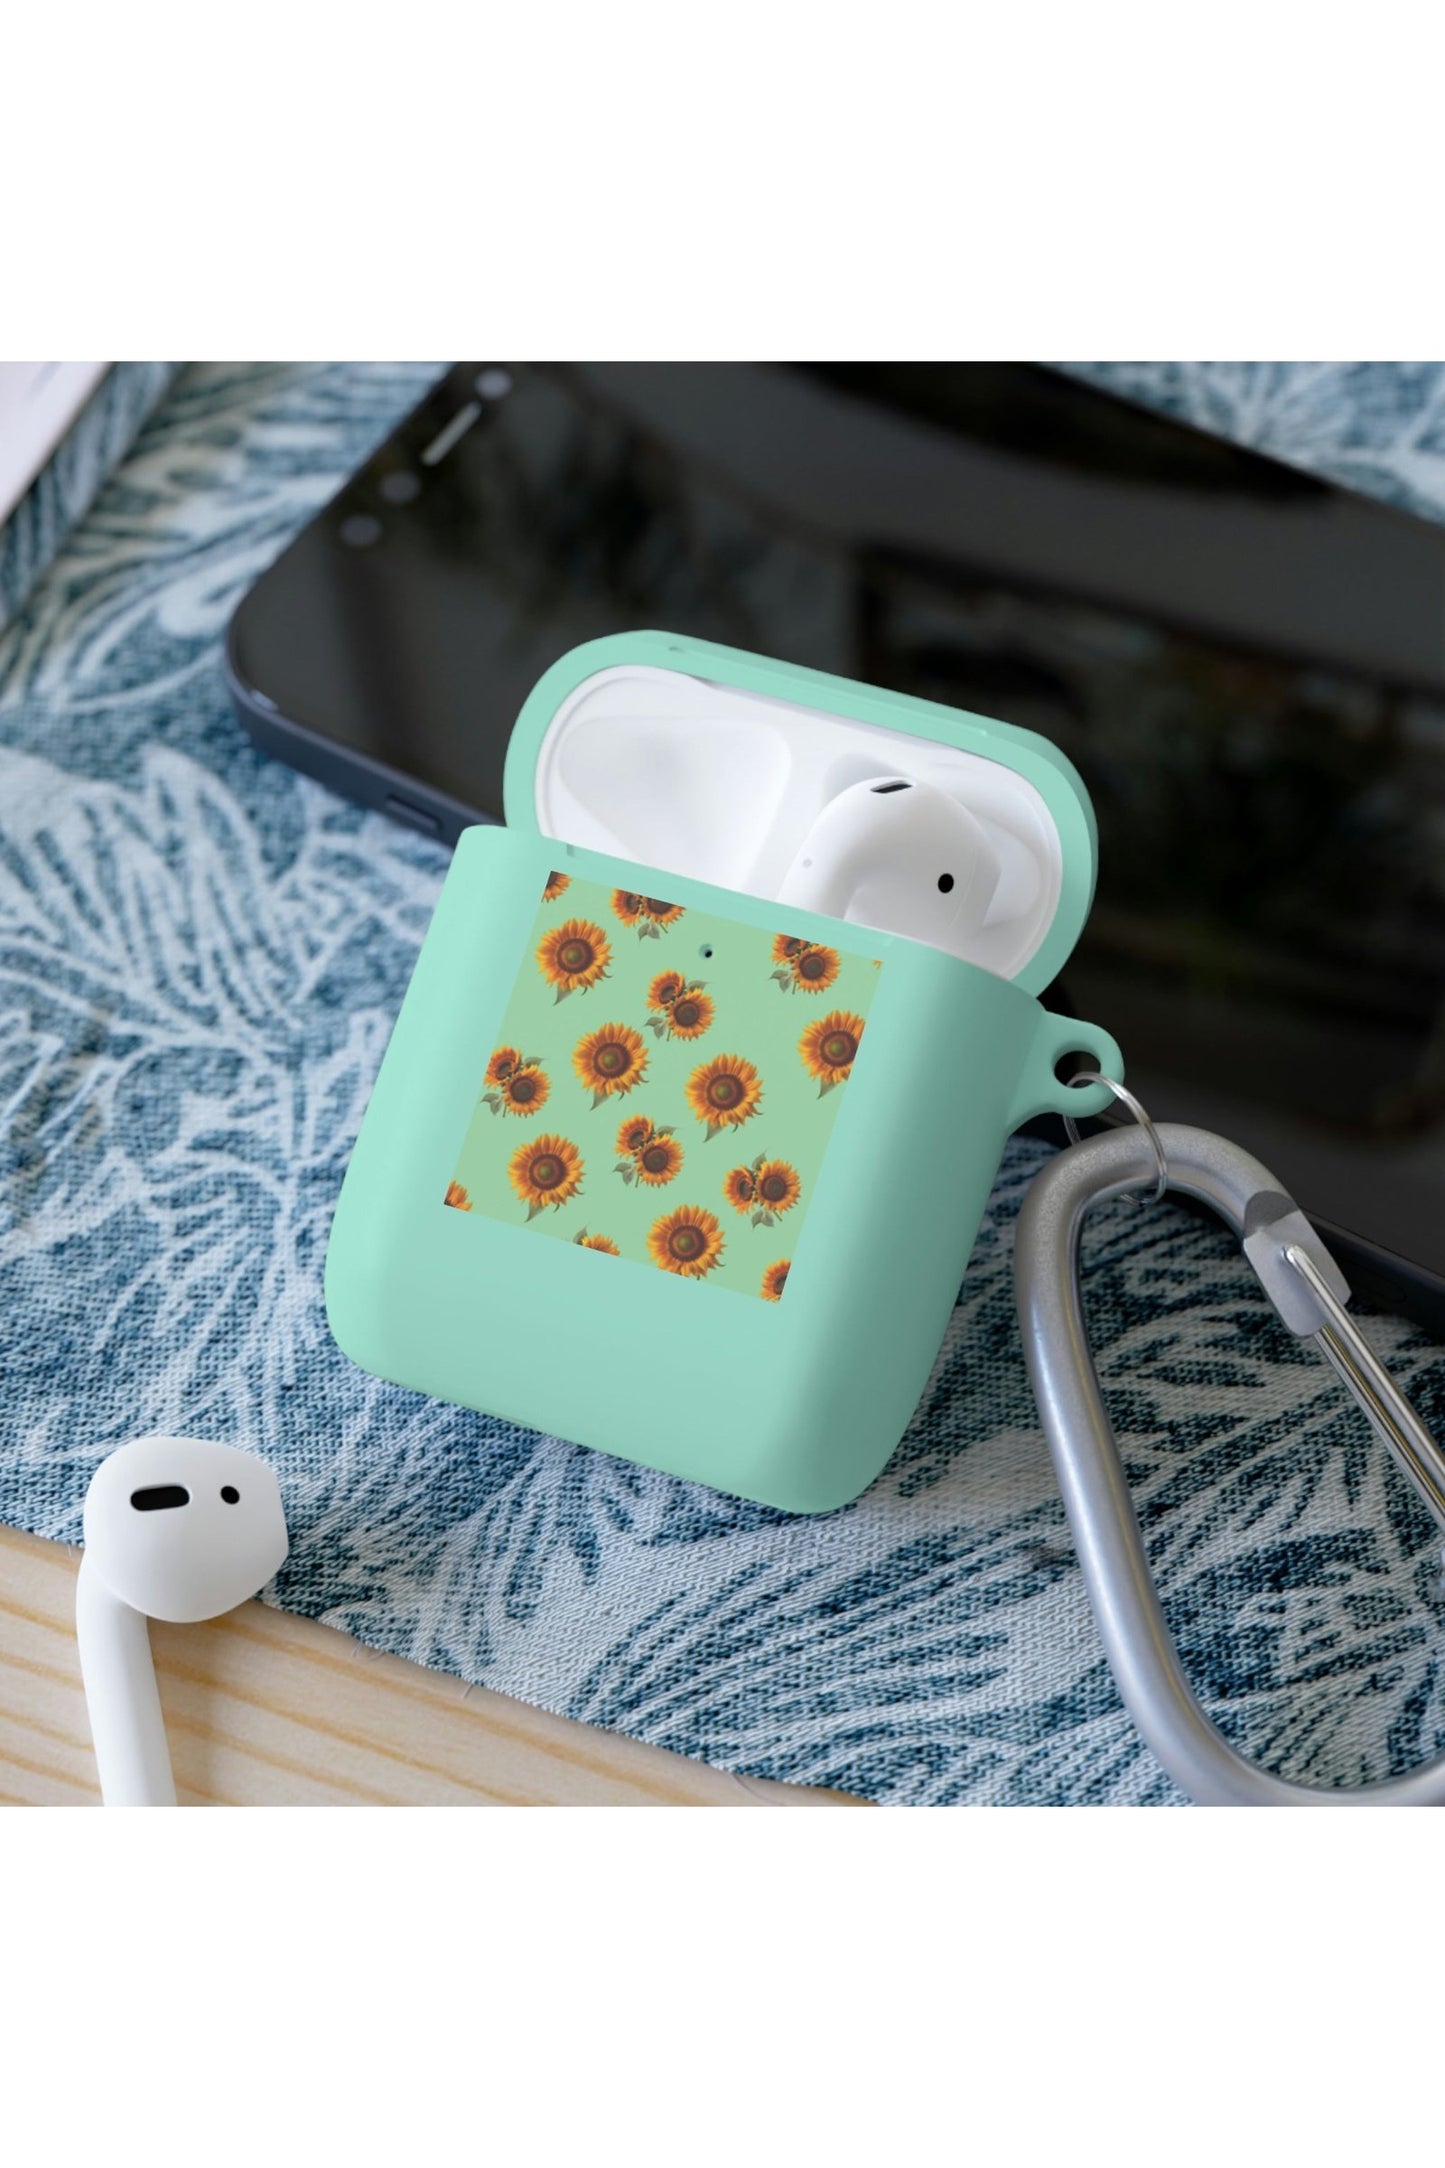 Skull and Sunflower AirPods and AirPods Pro Case Cover